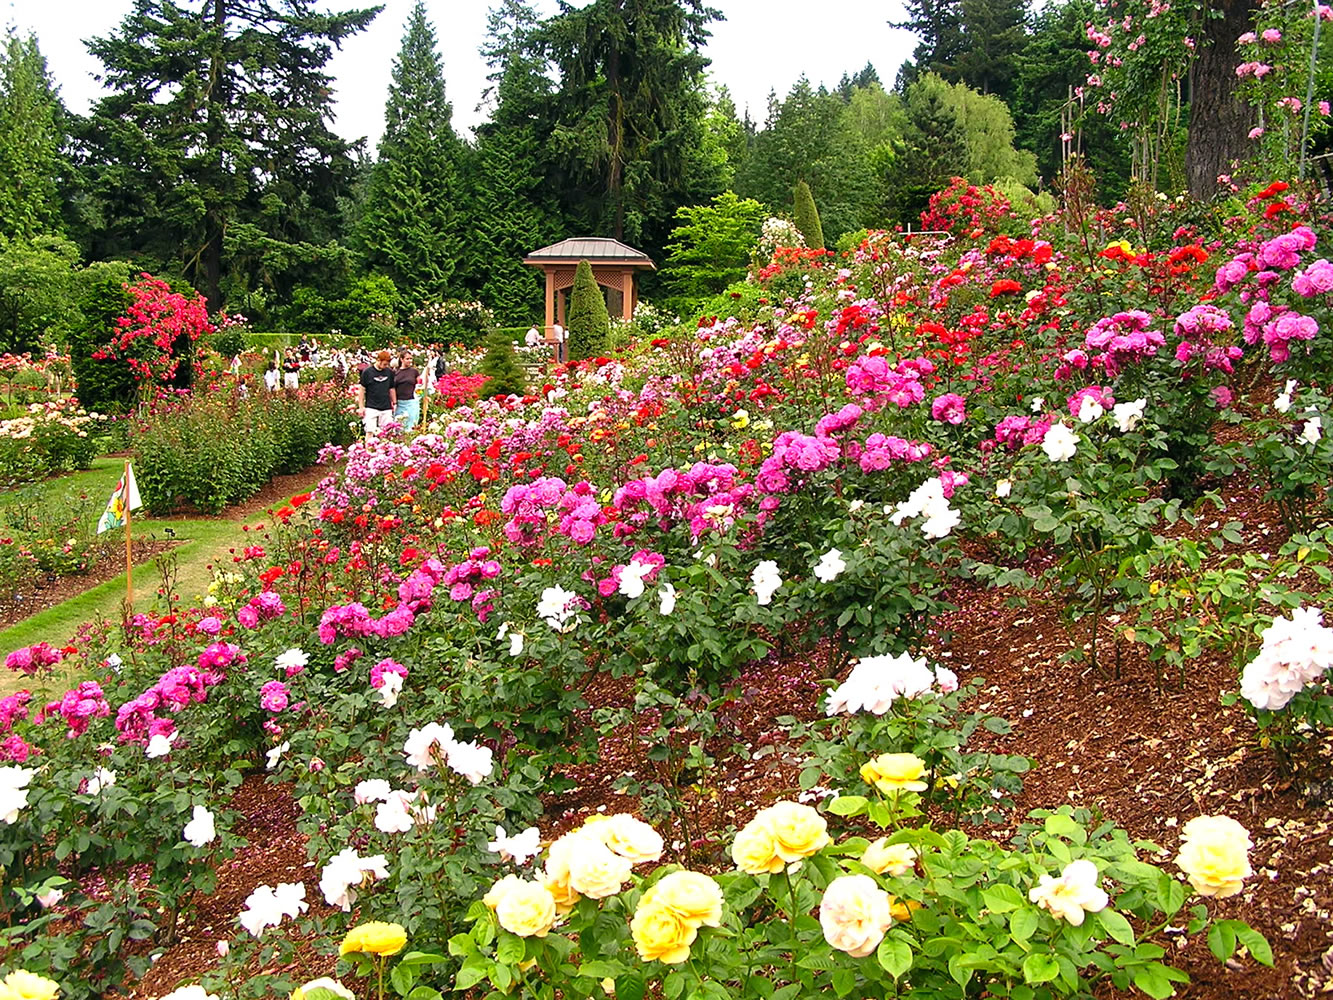 Portland rose garden’s history lies in WWI The Columbian